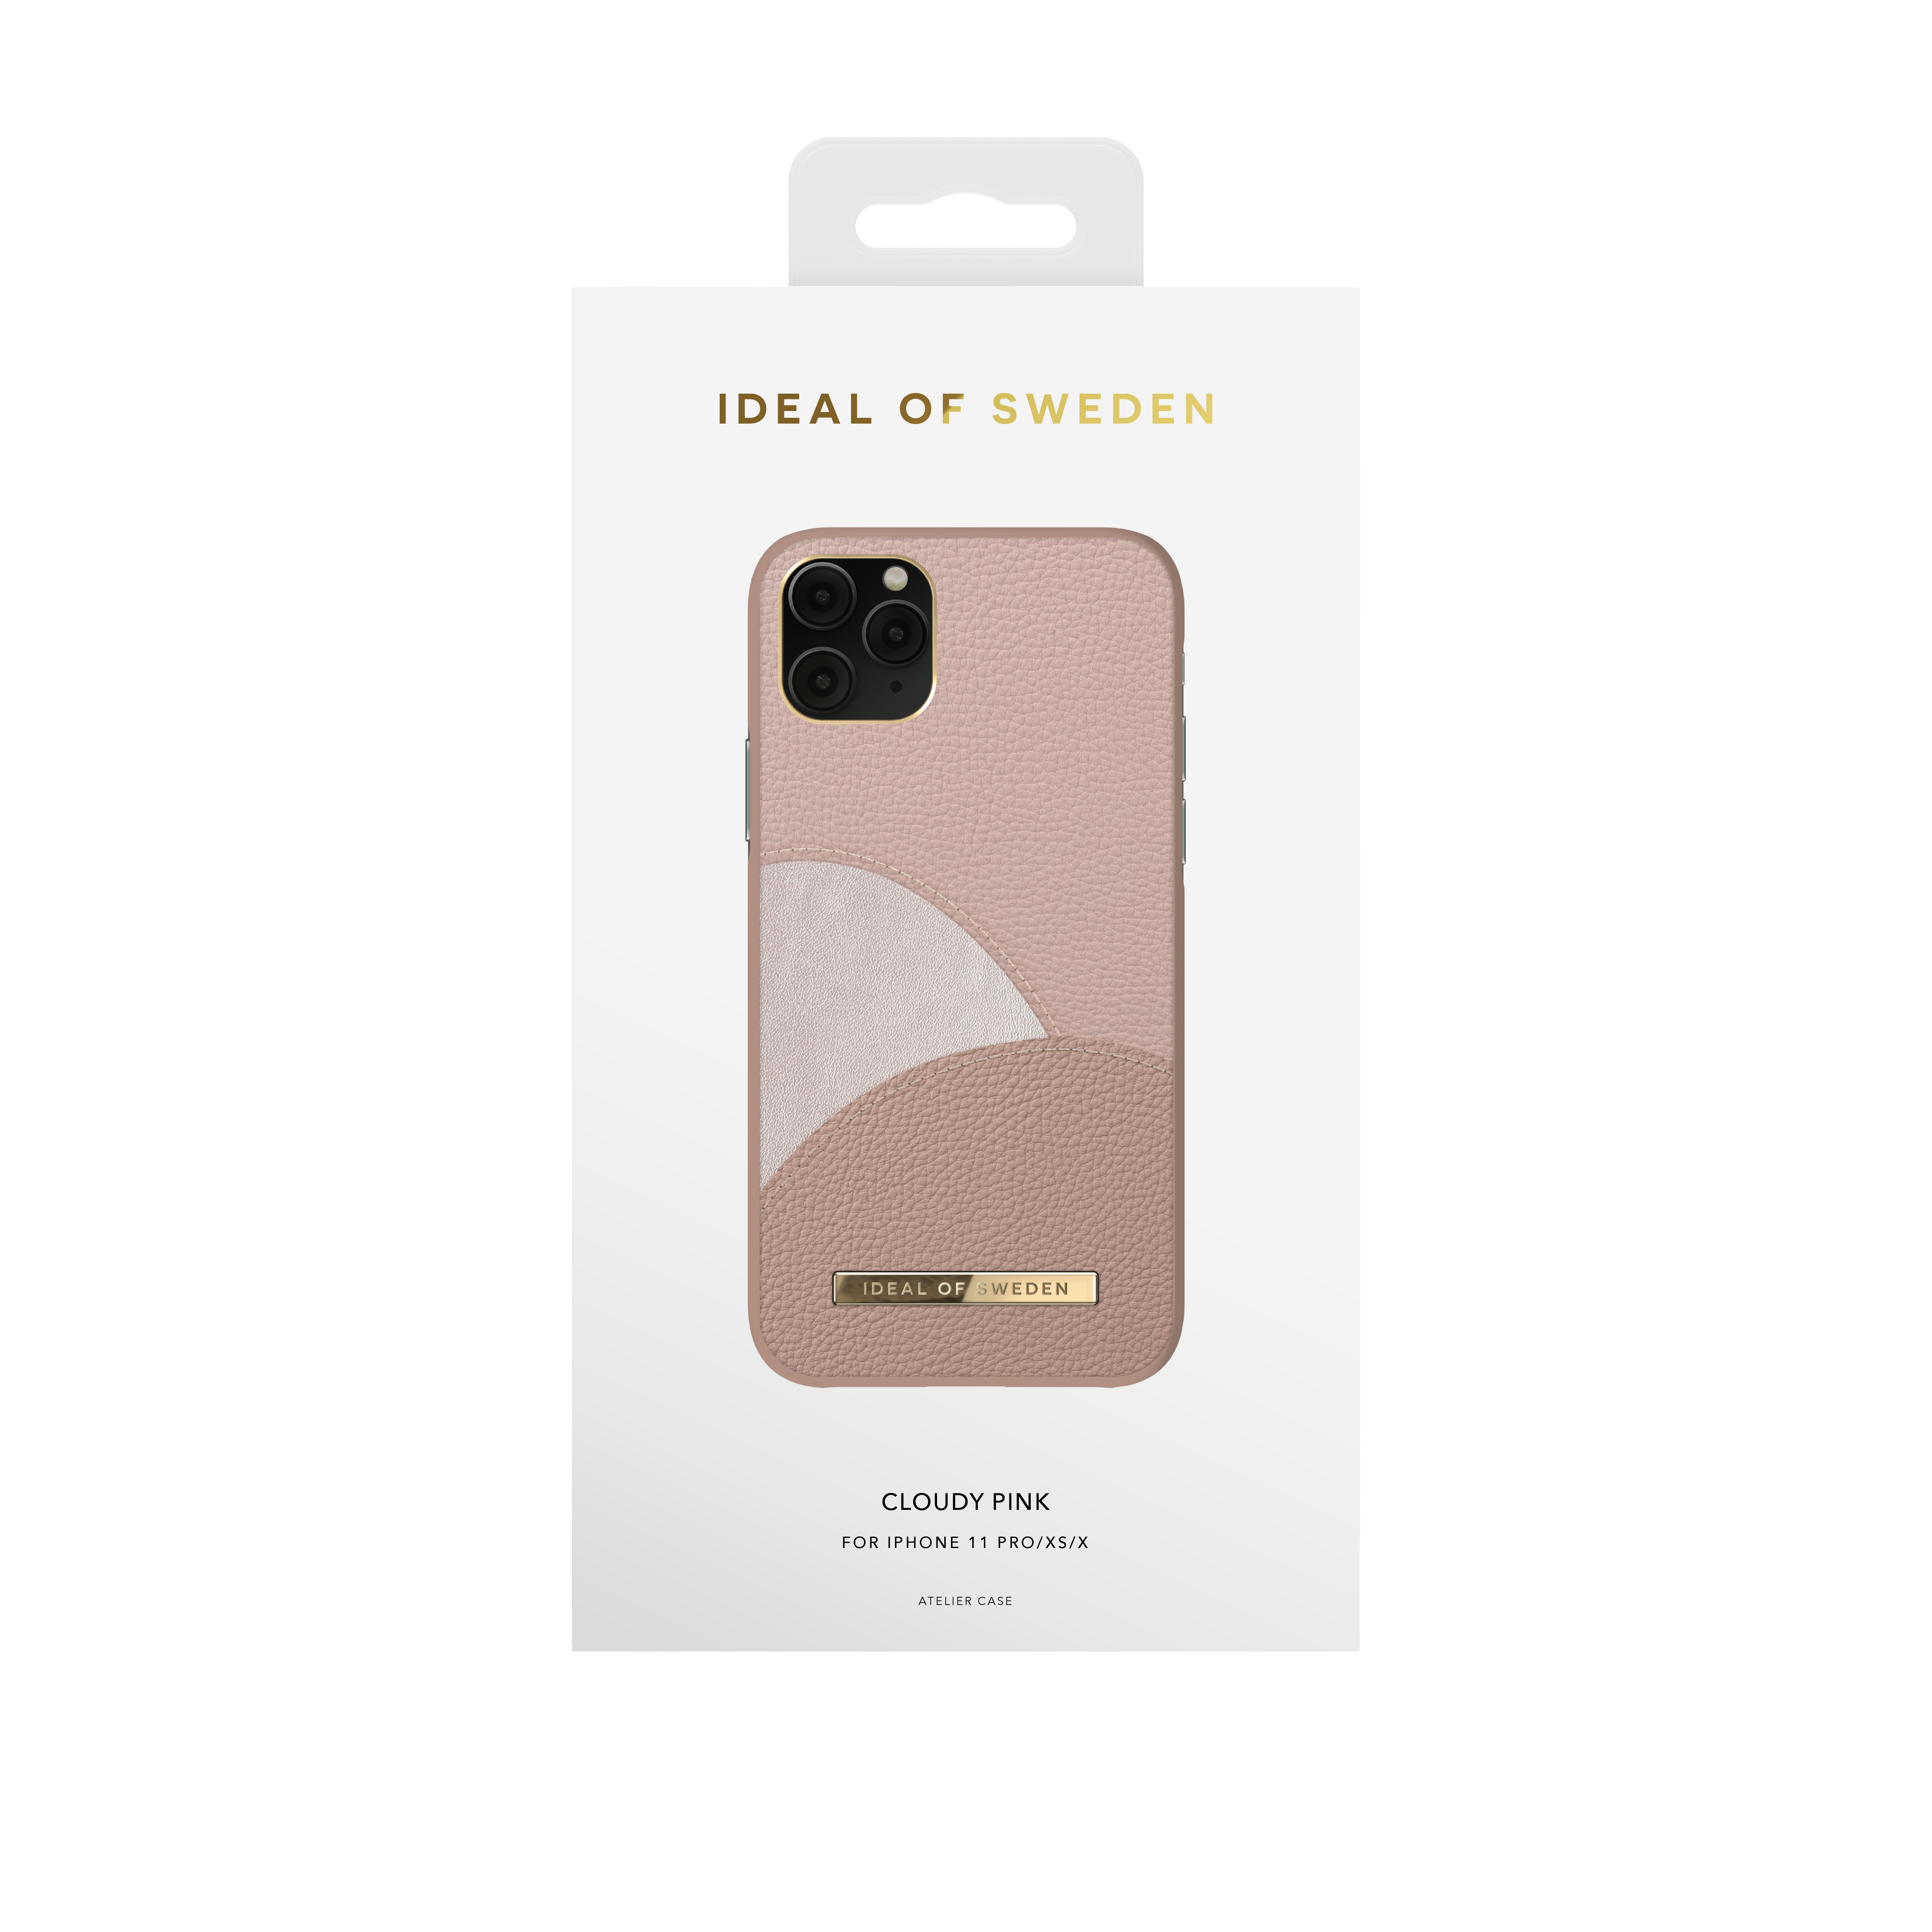 IDEAL OF 11 X, XS, SWEDEN iPhone IDACSS20-I1958-213, Cloudy Apple, Pro, Pink iPhone iPhone Backcover